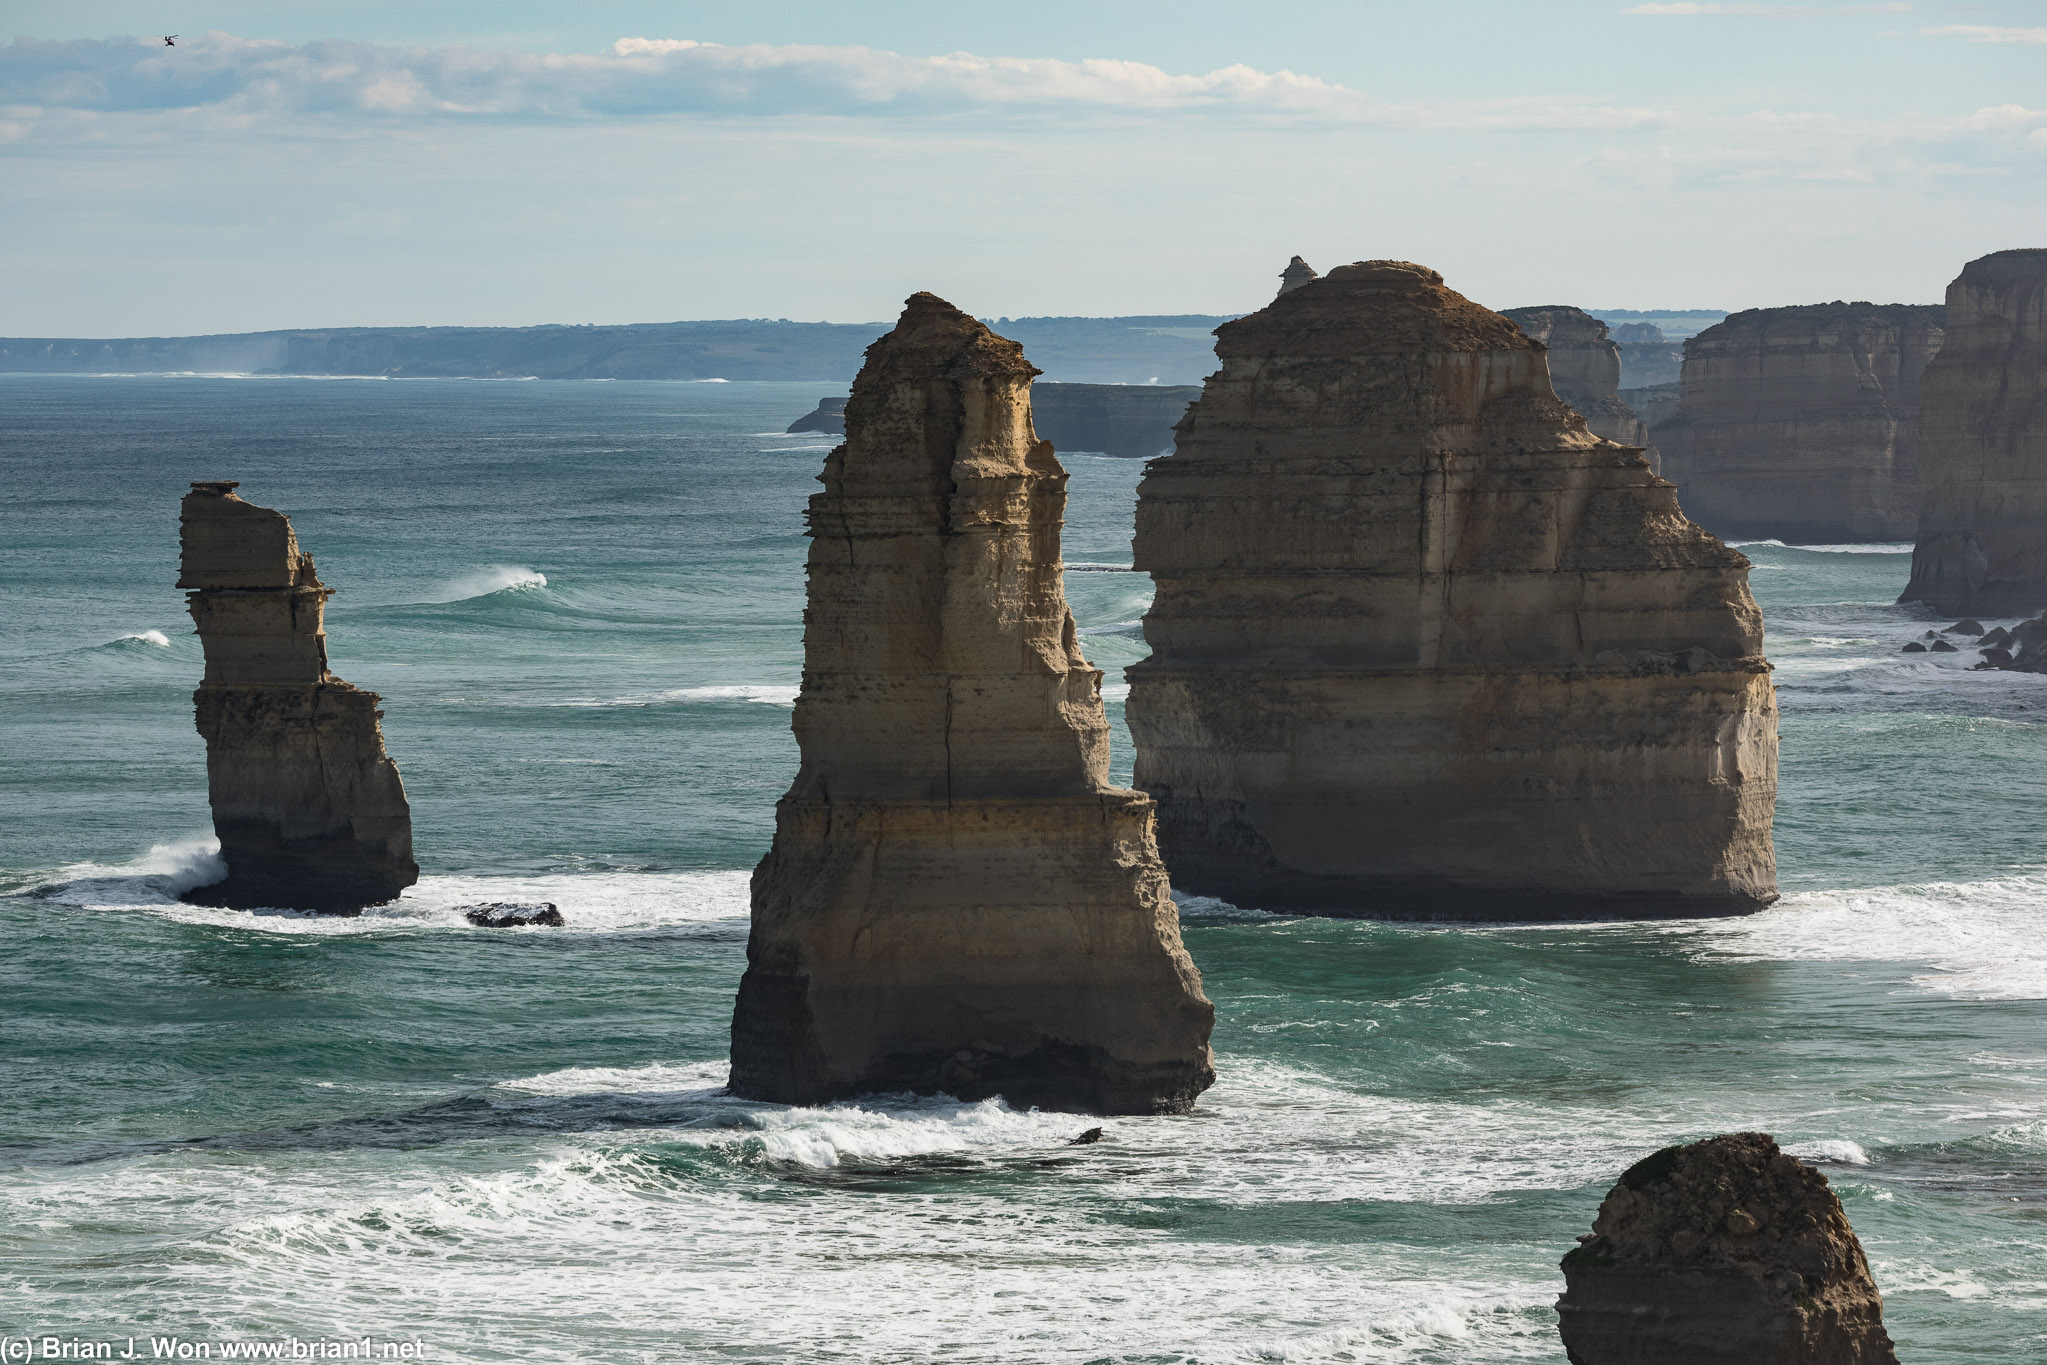 Some of the most photographed limestone stacks.